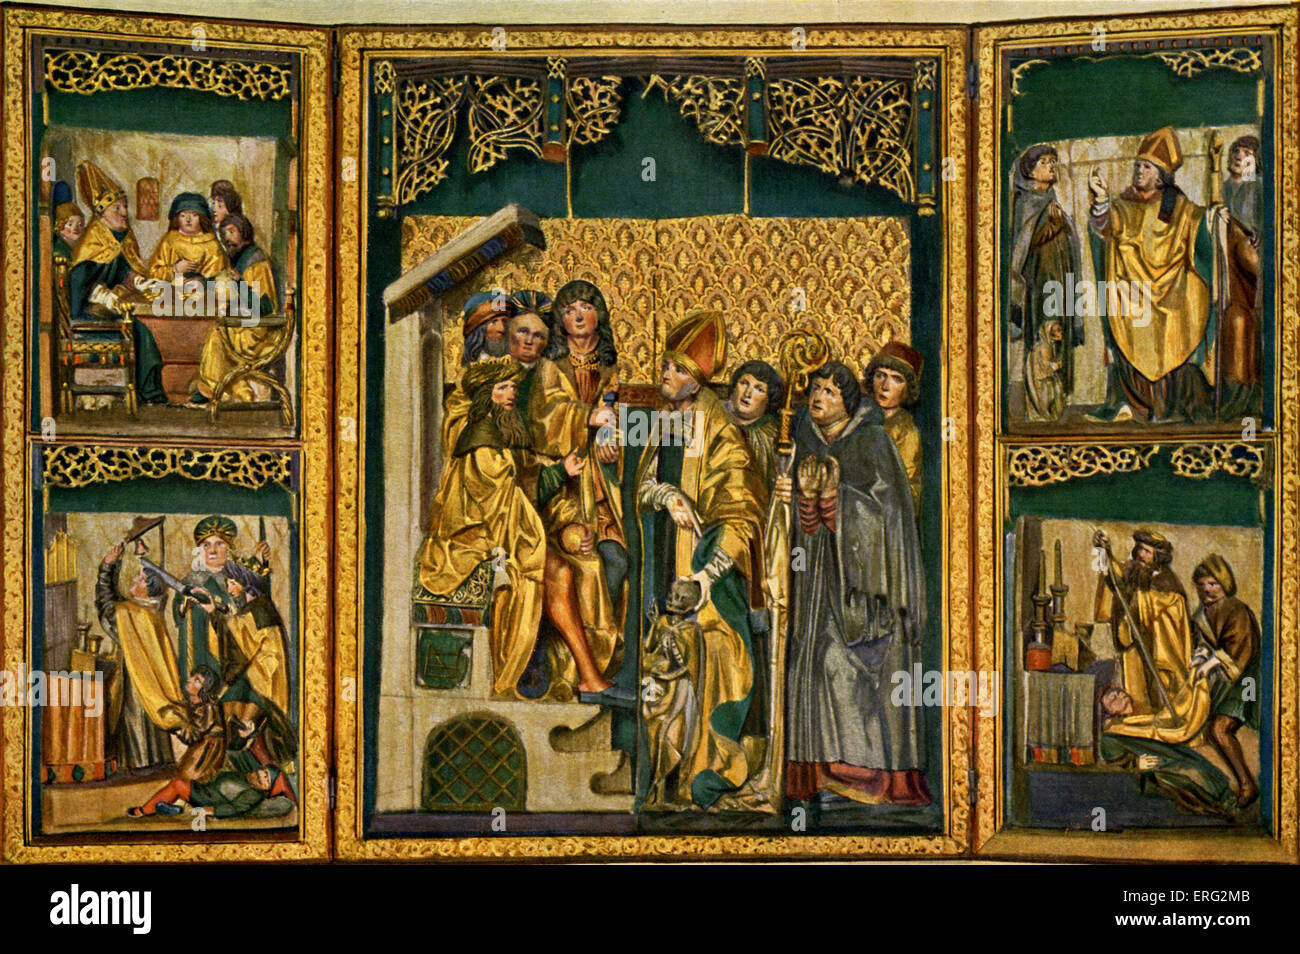 The life and martyrdom of Saint Stanislaus, painted triptych. Saint Stanislaus Polish Bishop and Saint 26 July 1030 - 11 April 1079. Stock Photo